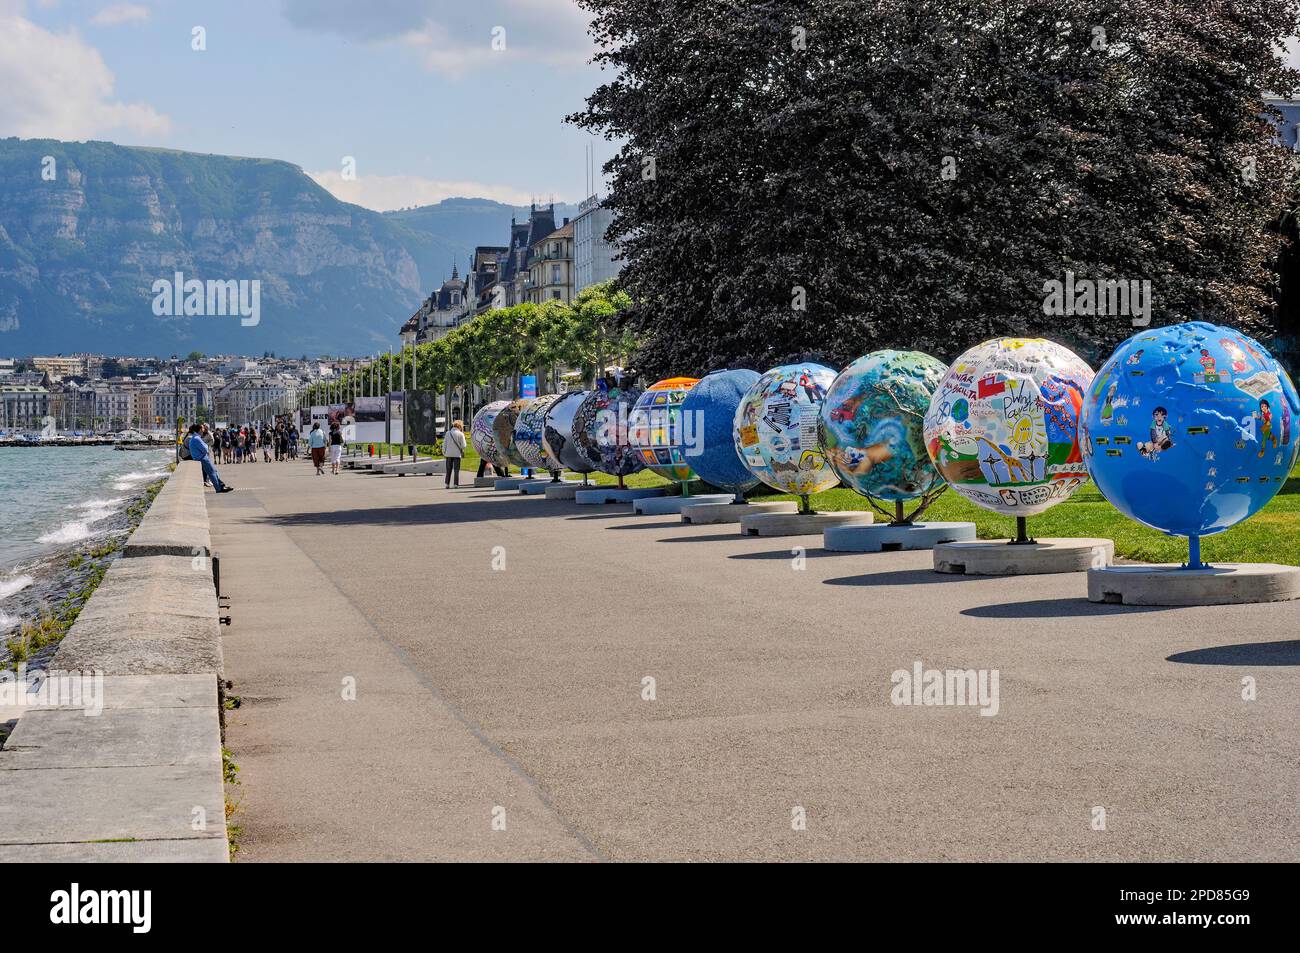 A row of statues in forms of world globes displayed outdoors in the sunny park near body of water Stock Photo